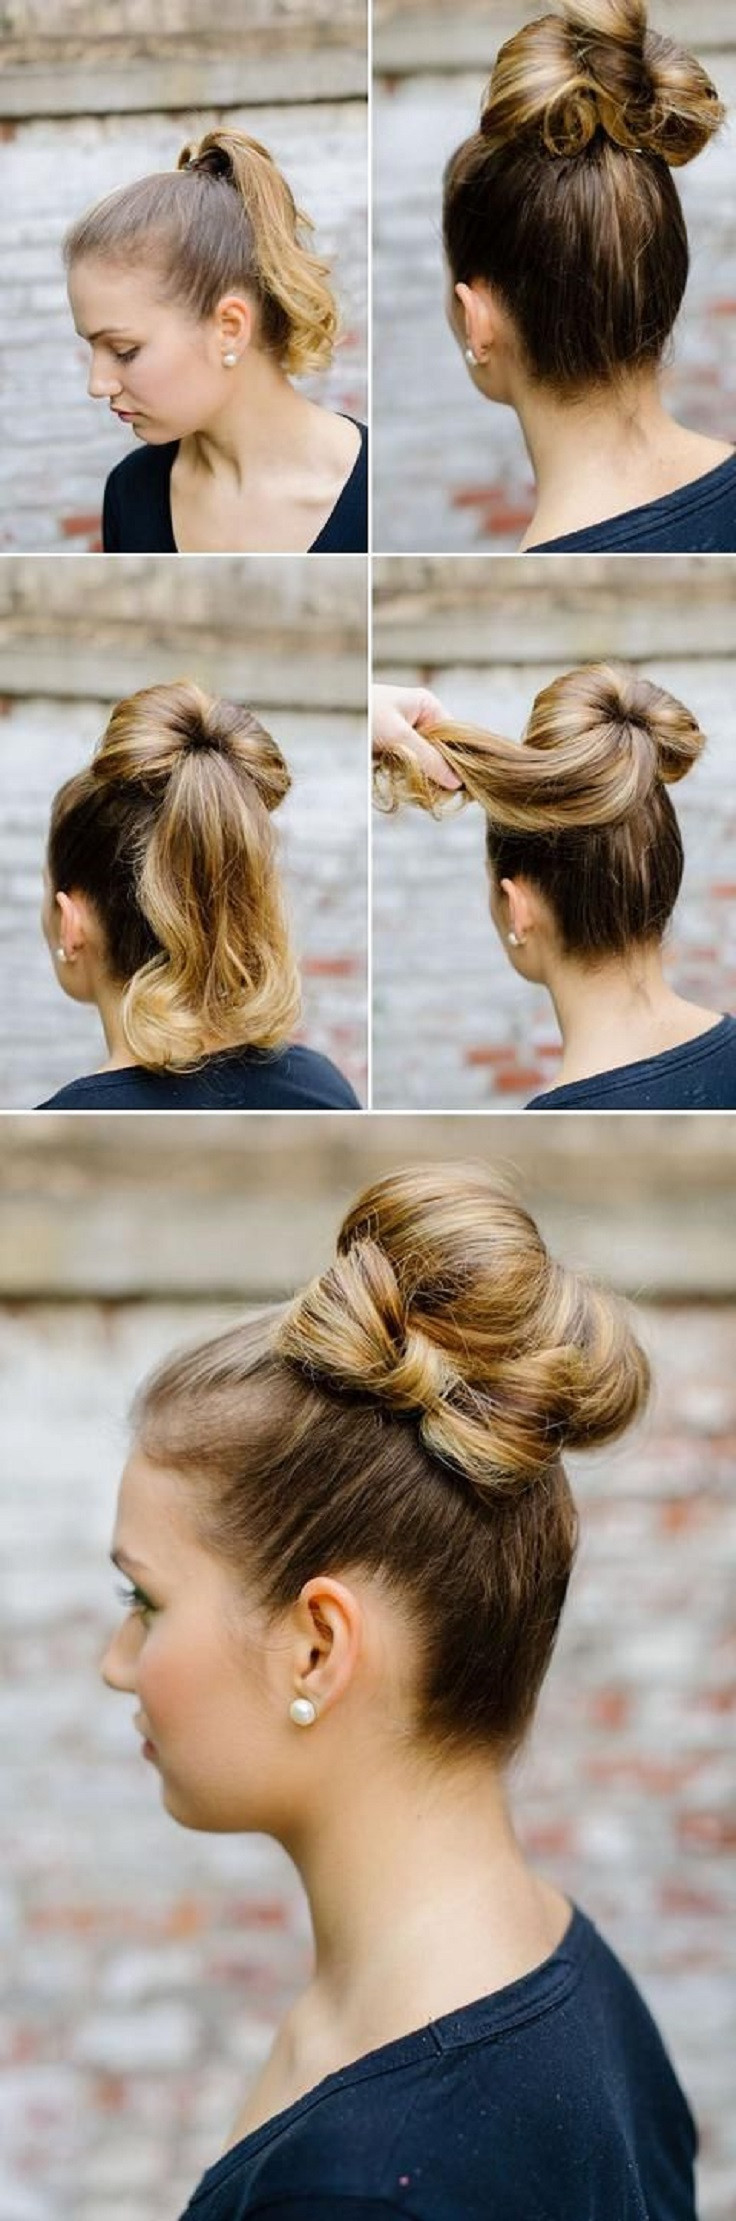 Hairstyle Tutorials For Short Hair
 Top 10 Long Hair Tutorials for Night Out Top Inspired